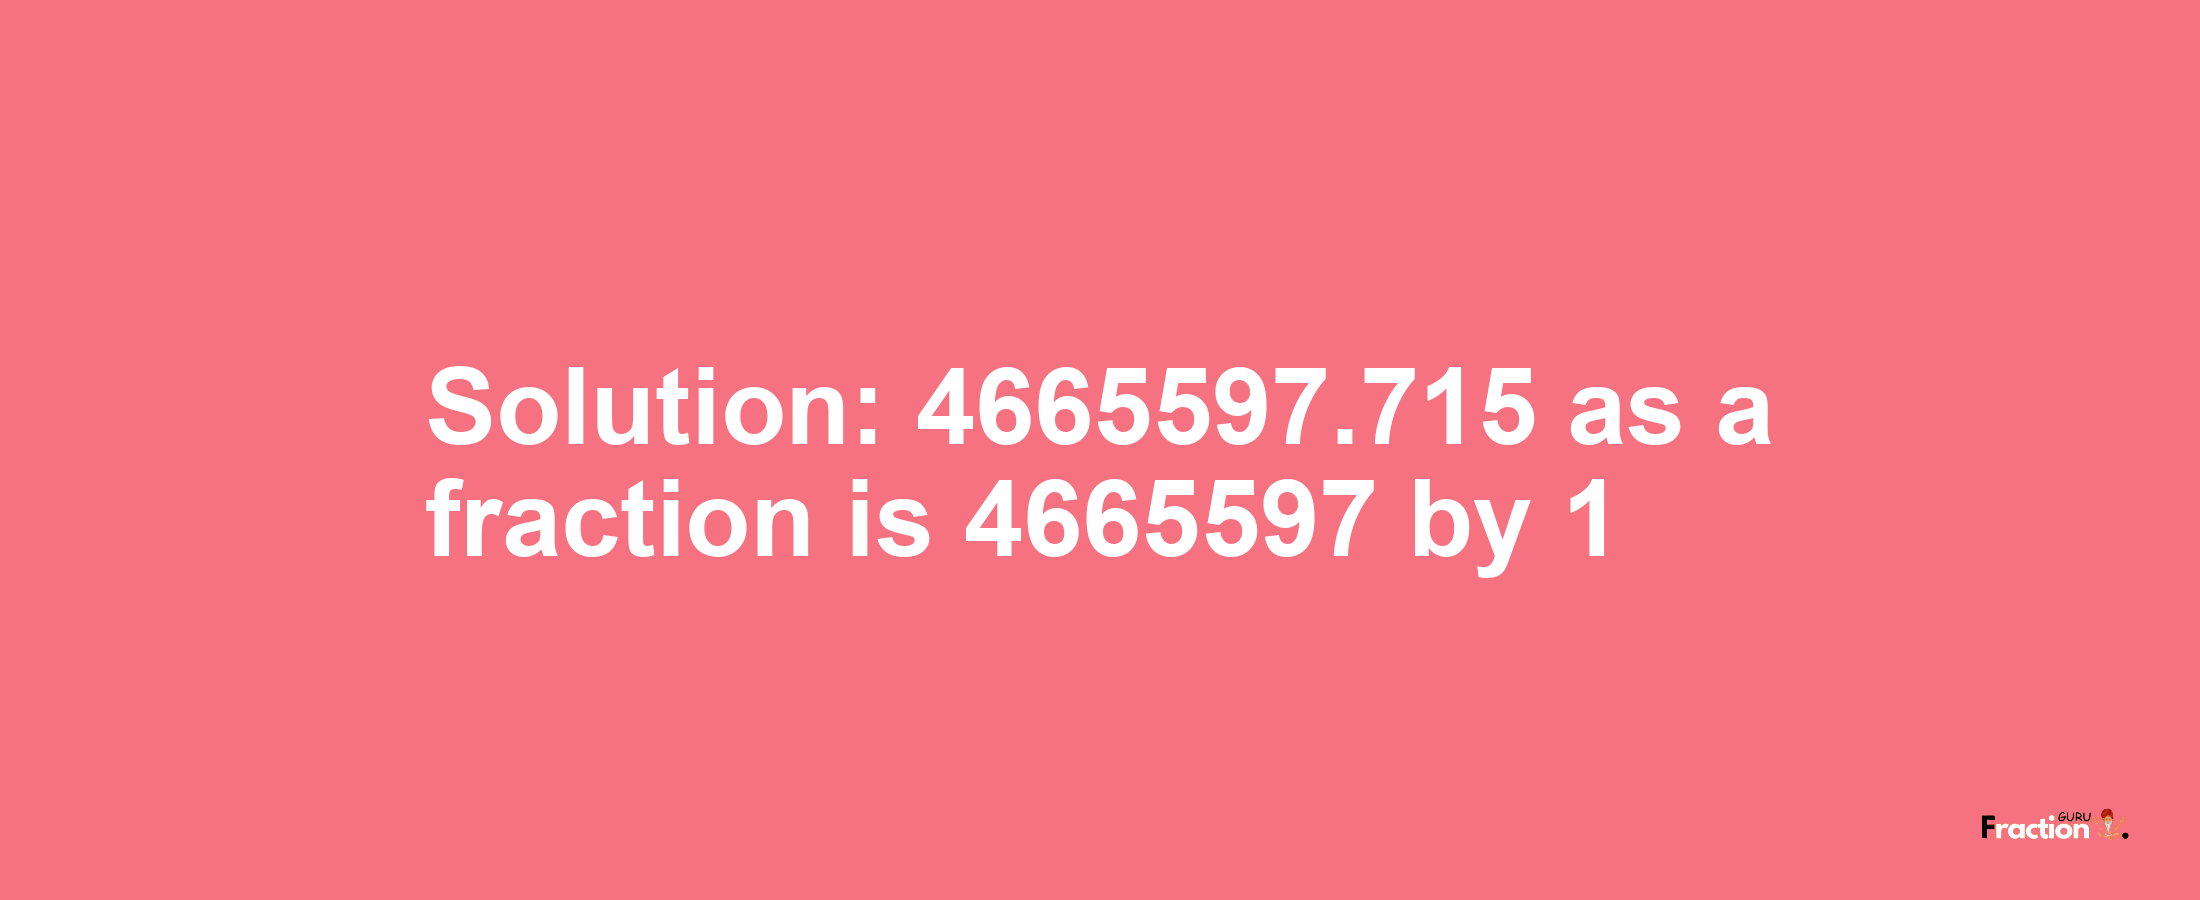 Solution:4665597.715 as a fraction is 4665597/1